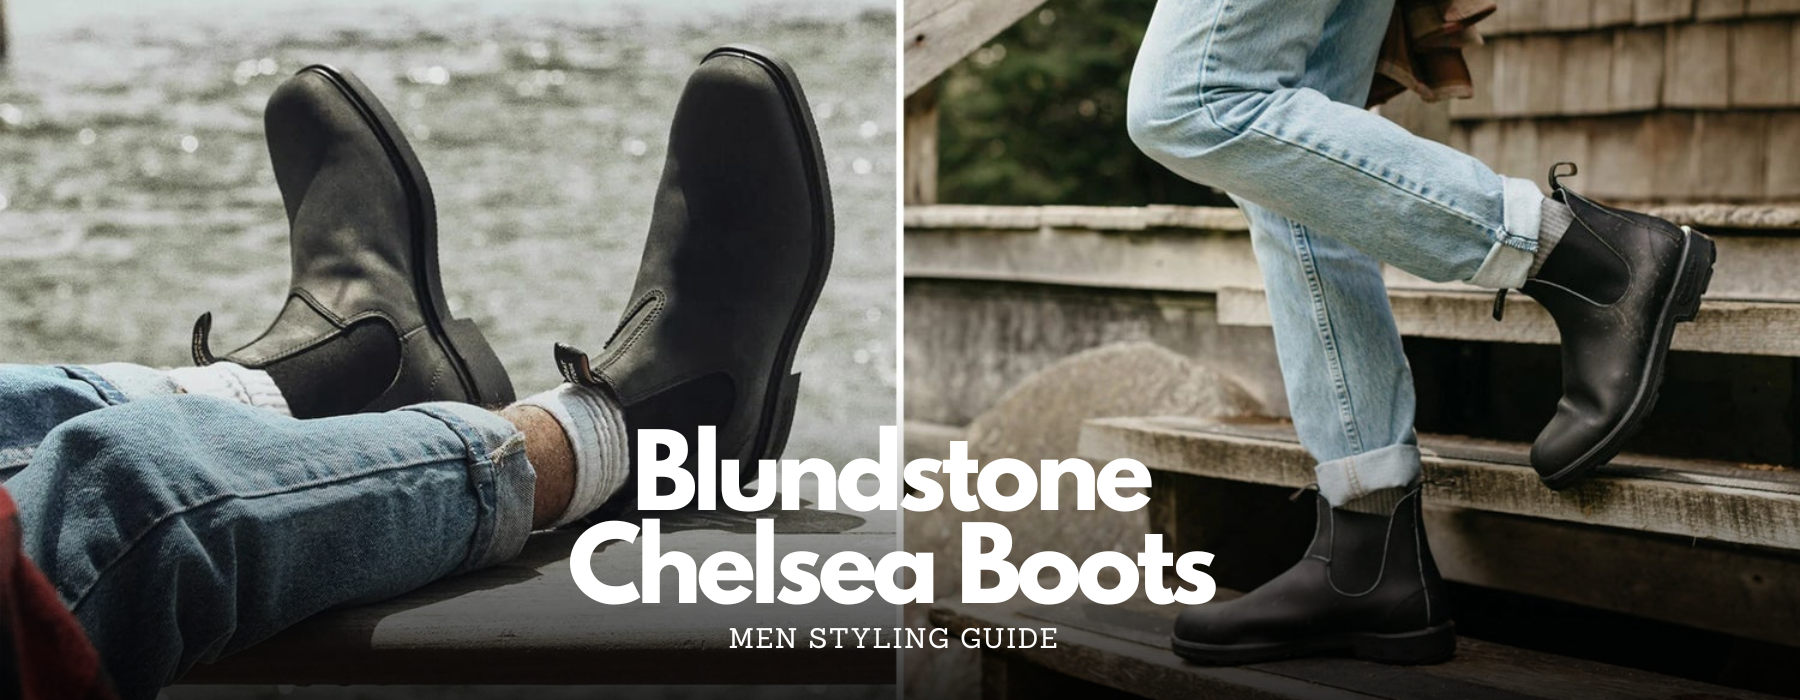 Men's Styling Guide for Blundstone Chelsea Boots